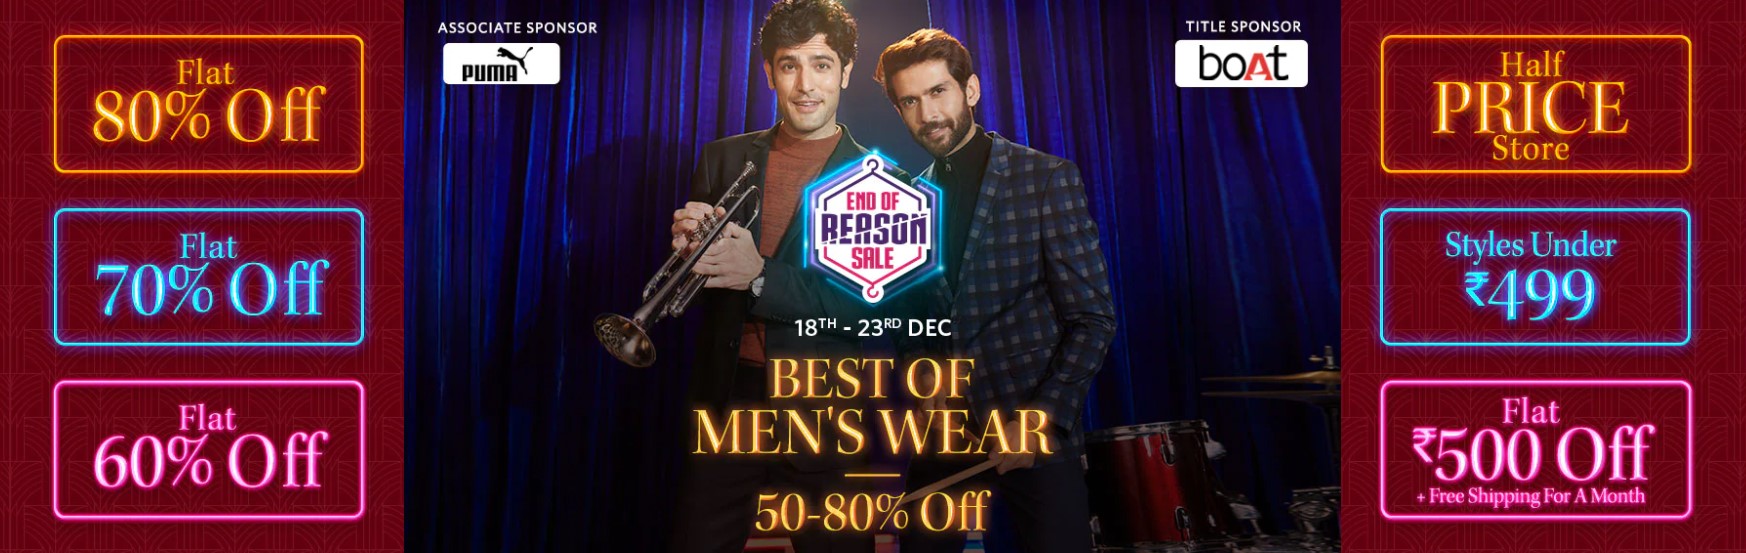 Myntra End of Reason Sale Offers for Men's